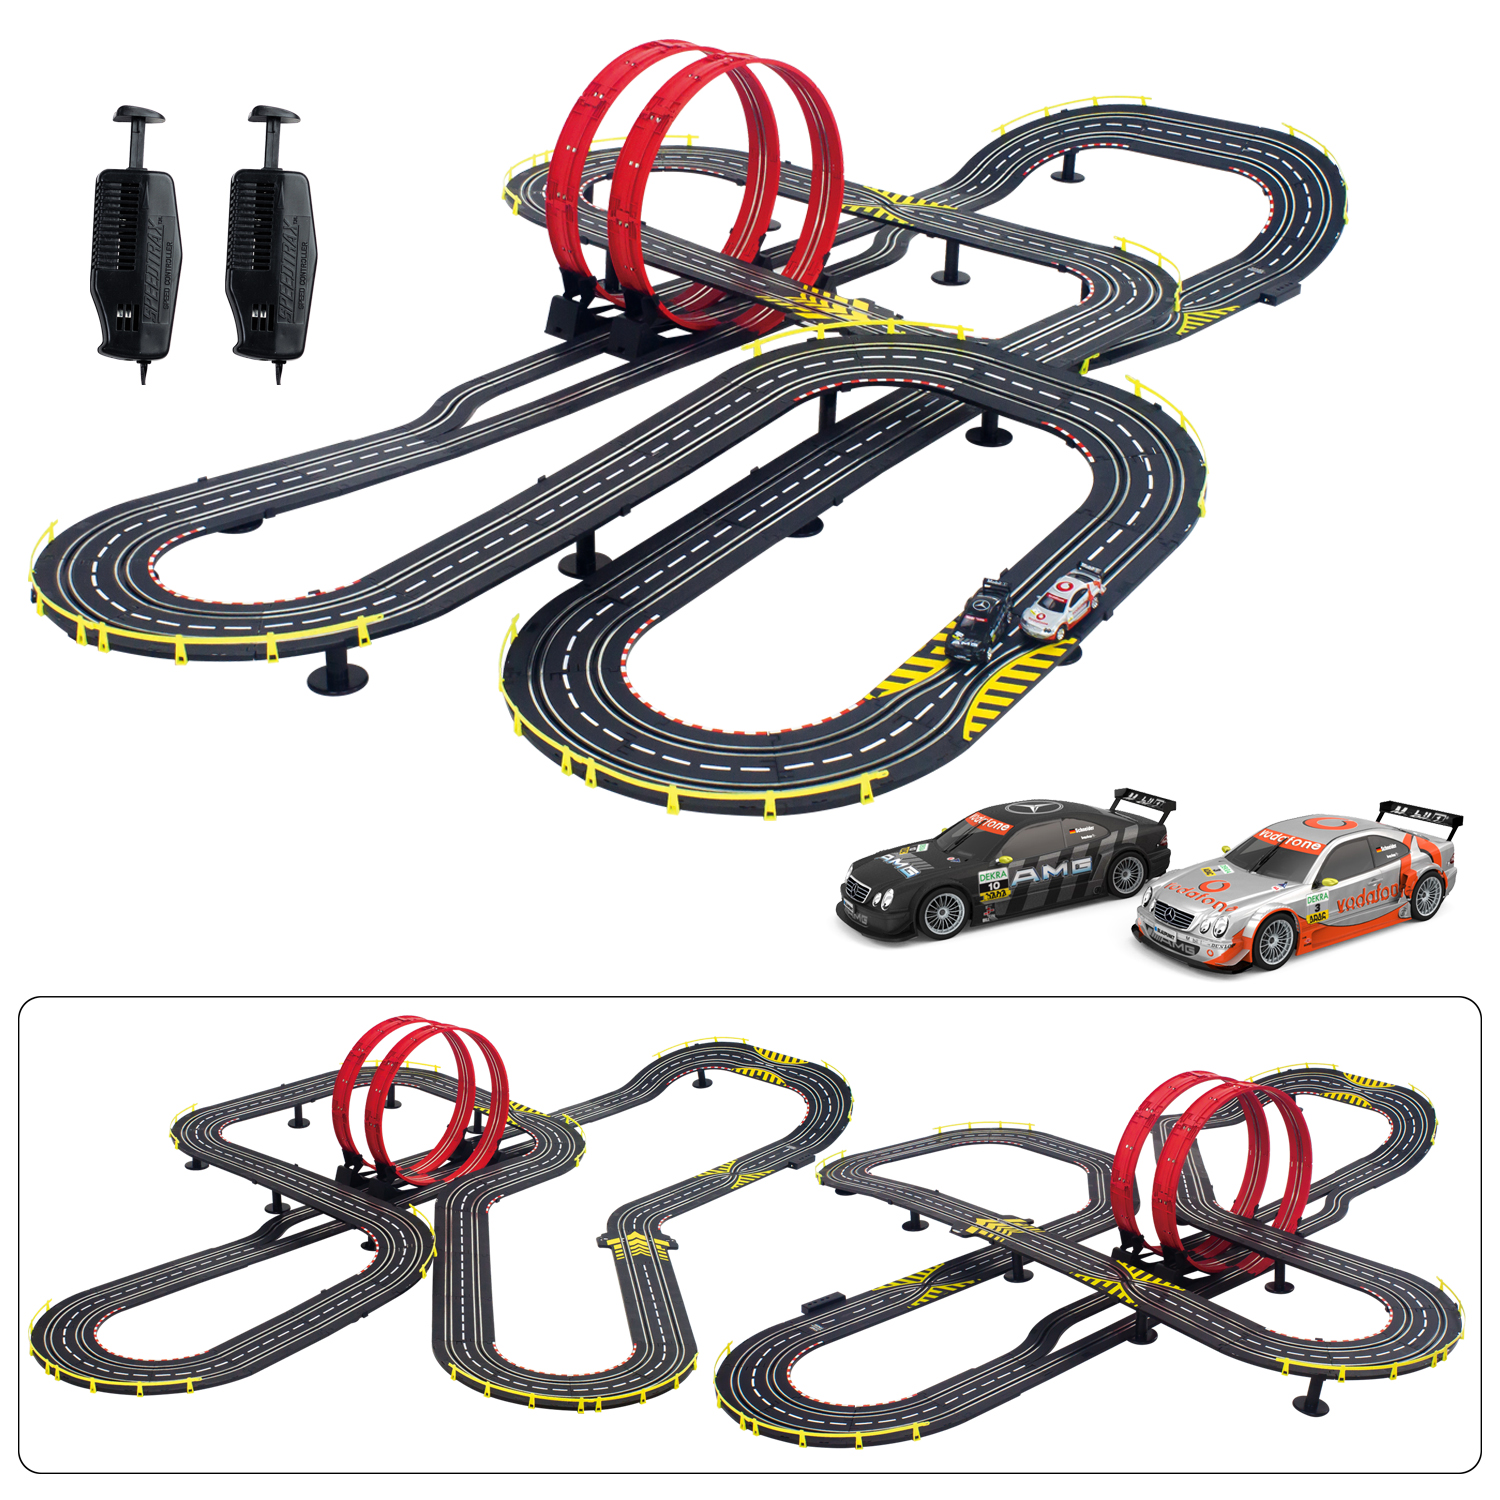 11 rows · The 10 Best Slot Car Sets 2, reviews scanned product comparison table # Quality .